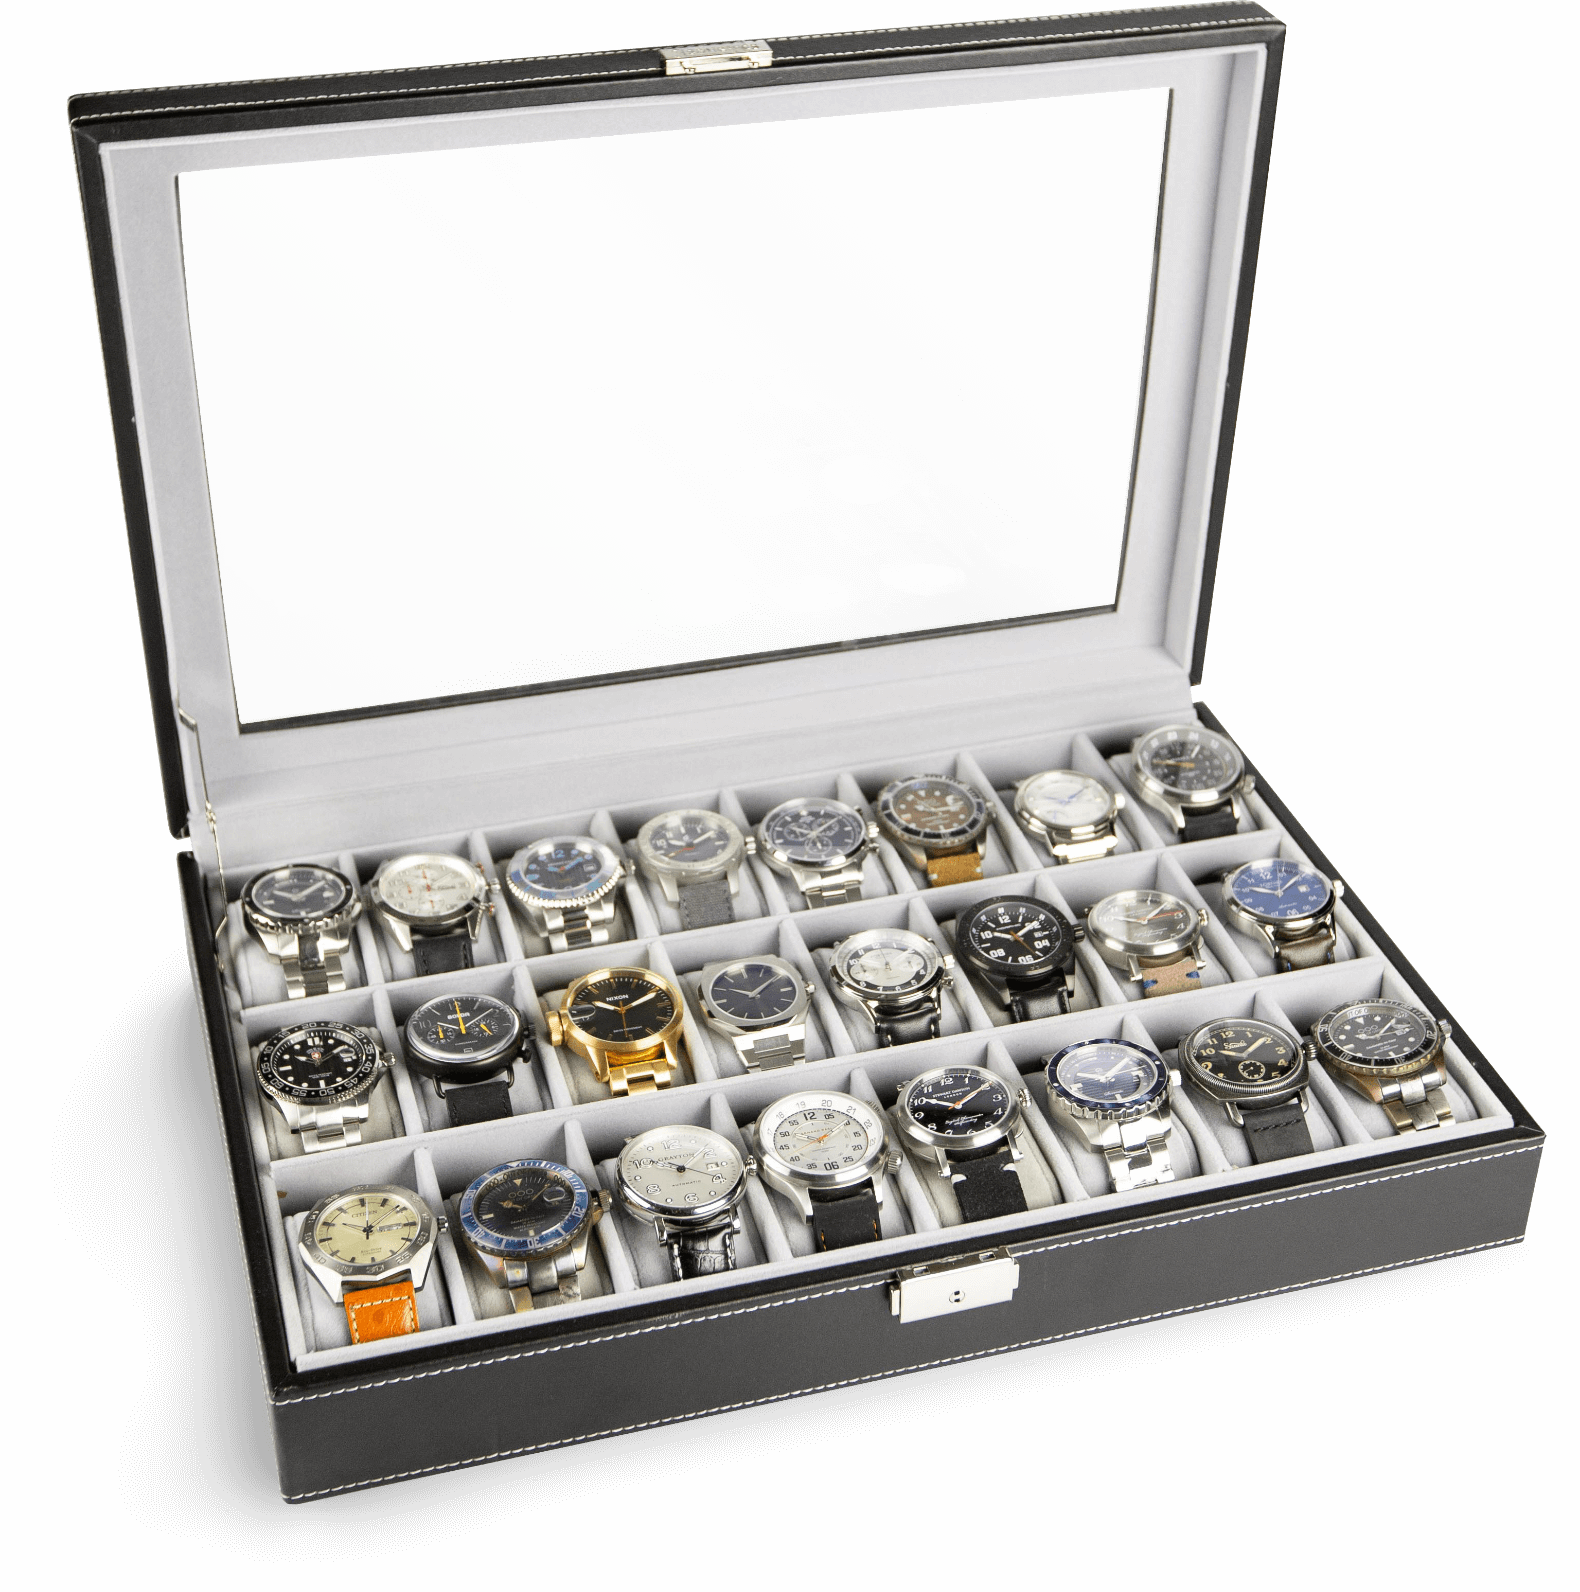 Watch Box with many watches